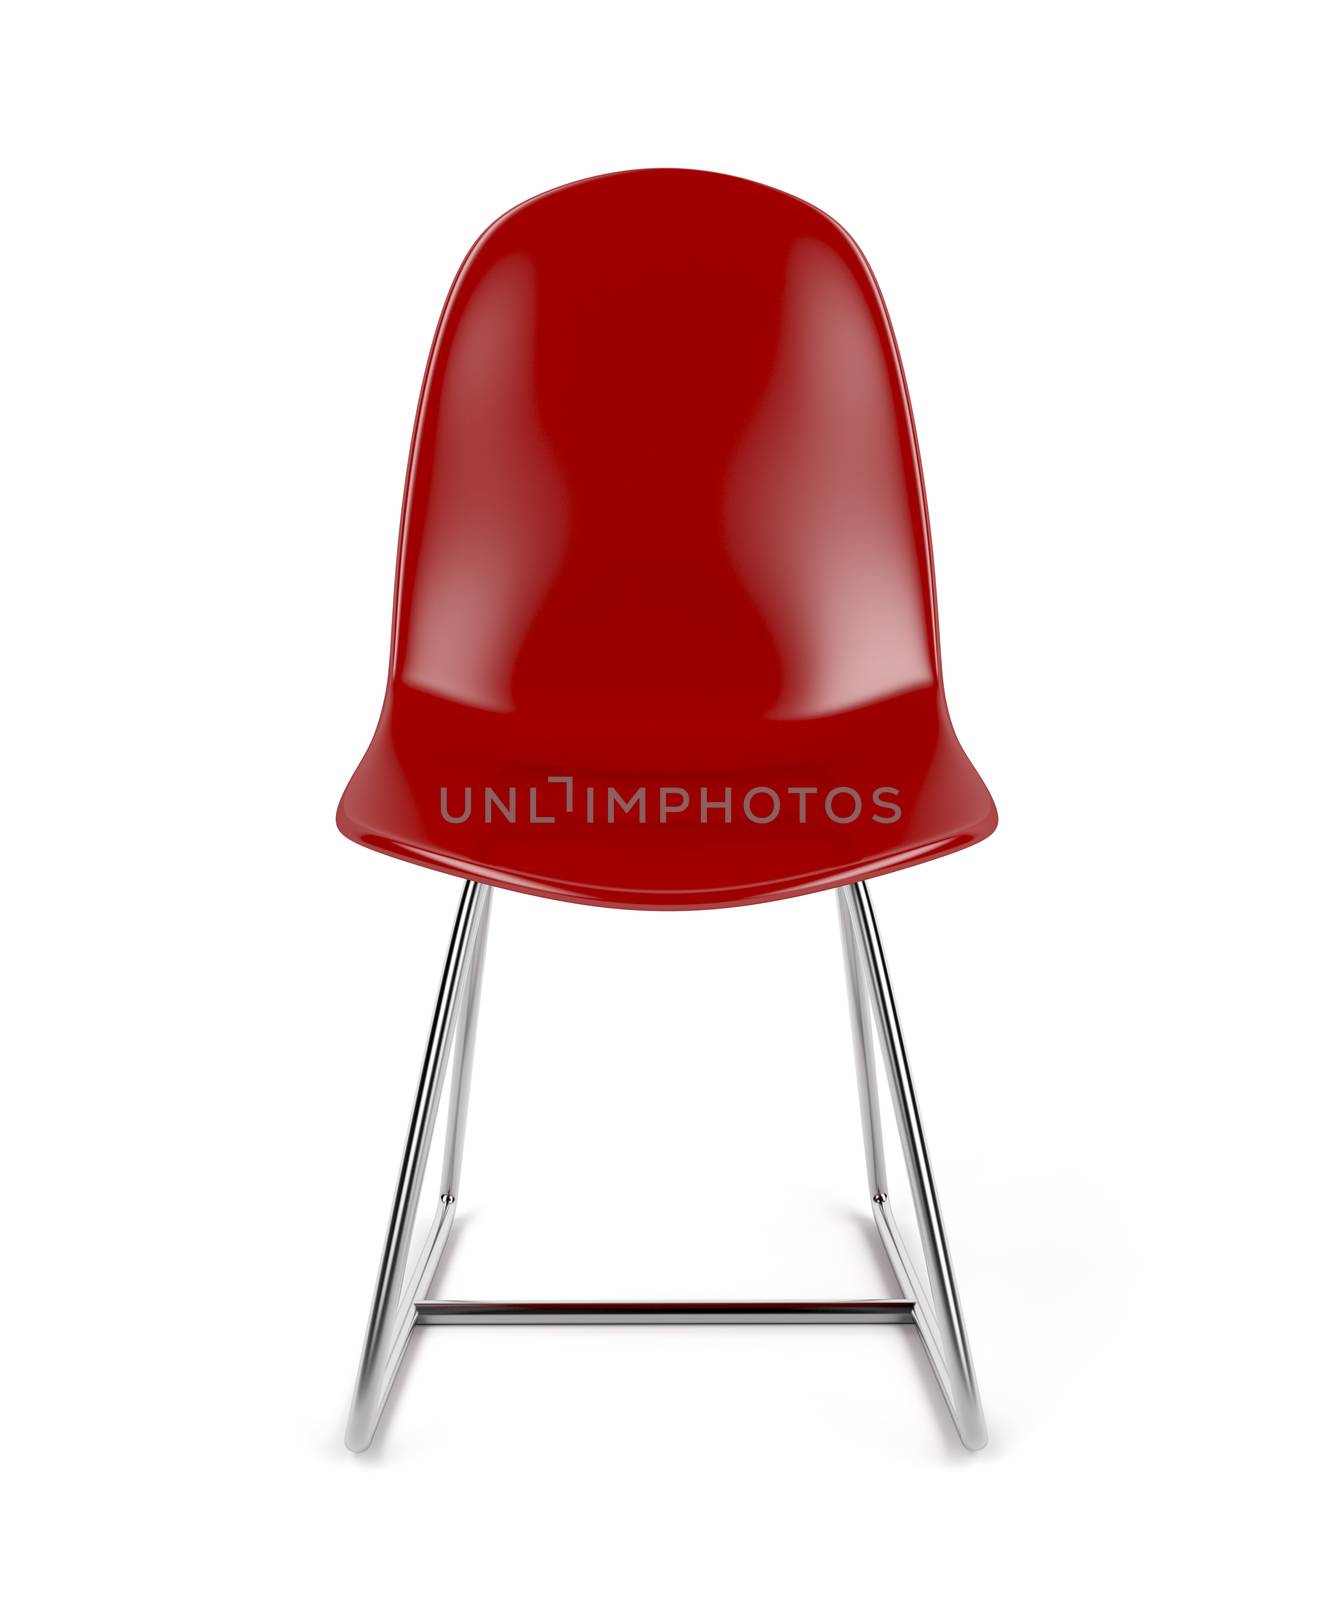 Red transparent plastic chair on white background